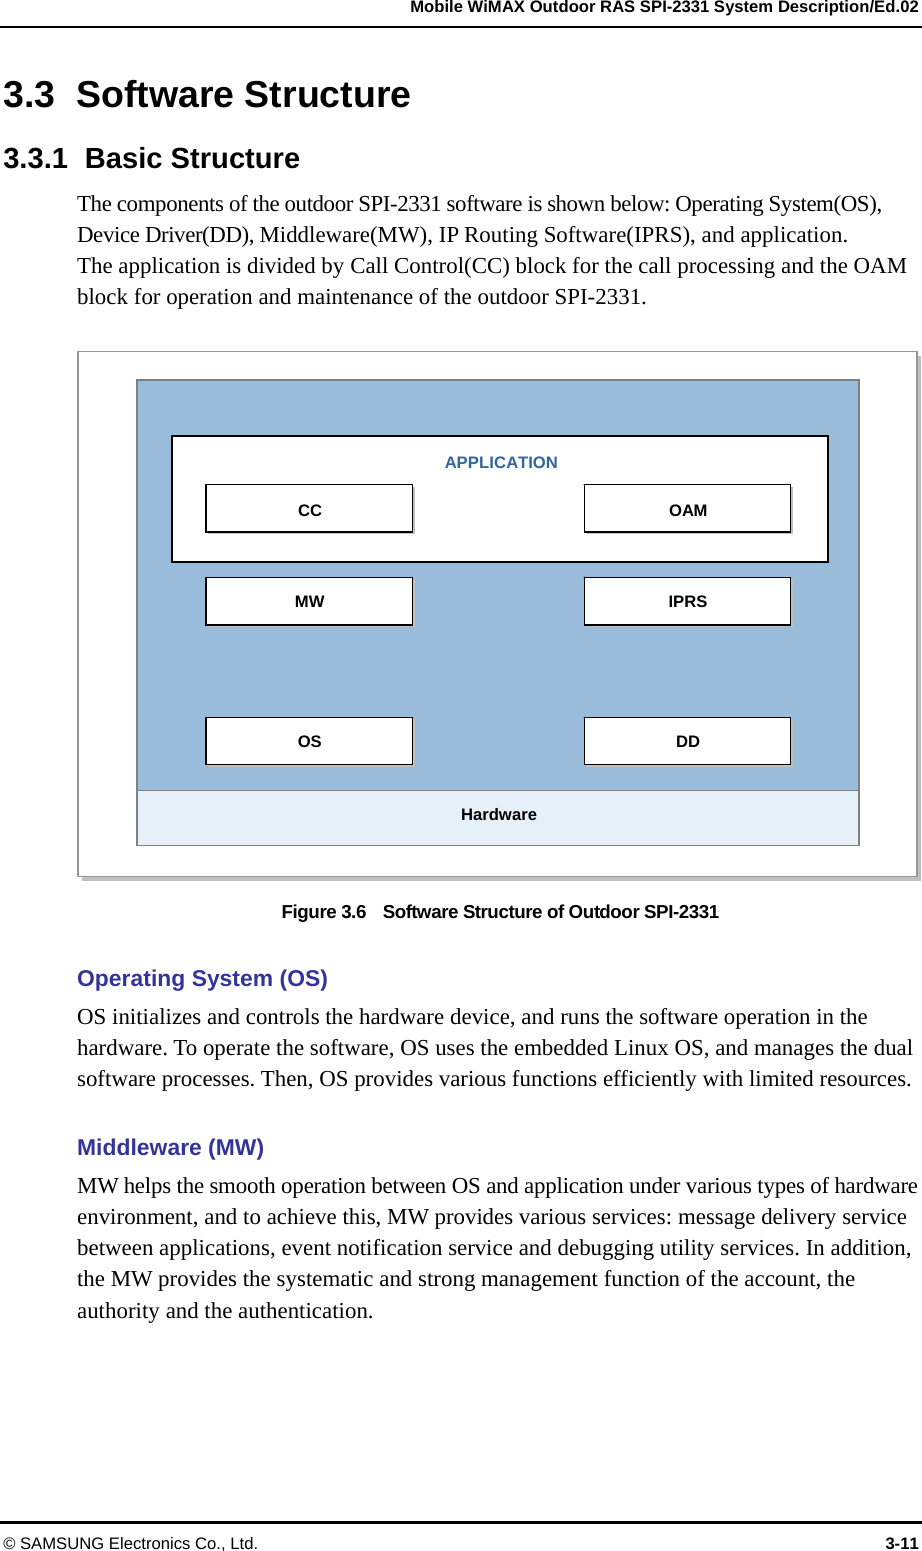   Mobile WiMAX Outdoor RAS SPI-2331 System Description/Ed.02 © SAMSUNG Electronics Co., Ltd.  3-11 3.3 Software Structure 3.3.1 Basic Structure The components of the outdoor SPI-2331 software is shown below: Operating System(OS), Device Driver(DD), Middleware(MW), IP Routing Software(IPRS), and application.   The application is divided by Call Control(CC) block for the call processing and the OAM block for operation and maintenance of the outdoor SPI-2331.  Figure 3.6    Software Structure of Outdoor SPI-2331  Operating System (OS) OS initializes and controls the hardware device, and runs the software operation in the hardware. To operate the software, OS uses the embedded Linux OS, and manages the dual software processes. Then, OS provides various functions efficiently with limited resources.    Middleware (MW) MW helps the smooth operation between OS and application under various types of hardware environment, and to achieve this, MW provides various services: message delivery service between applications, event notification service and debugging utility services. In addition, the MW provides the systematic and strong management function of the account, the authority and the authentication. MW IPRS OS DD Hardware OAM CC APPLICATION 